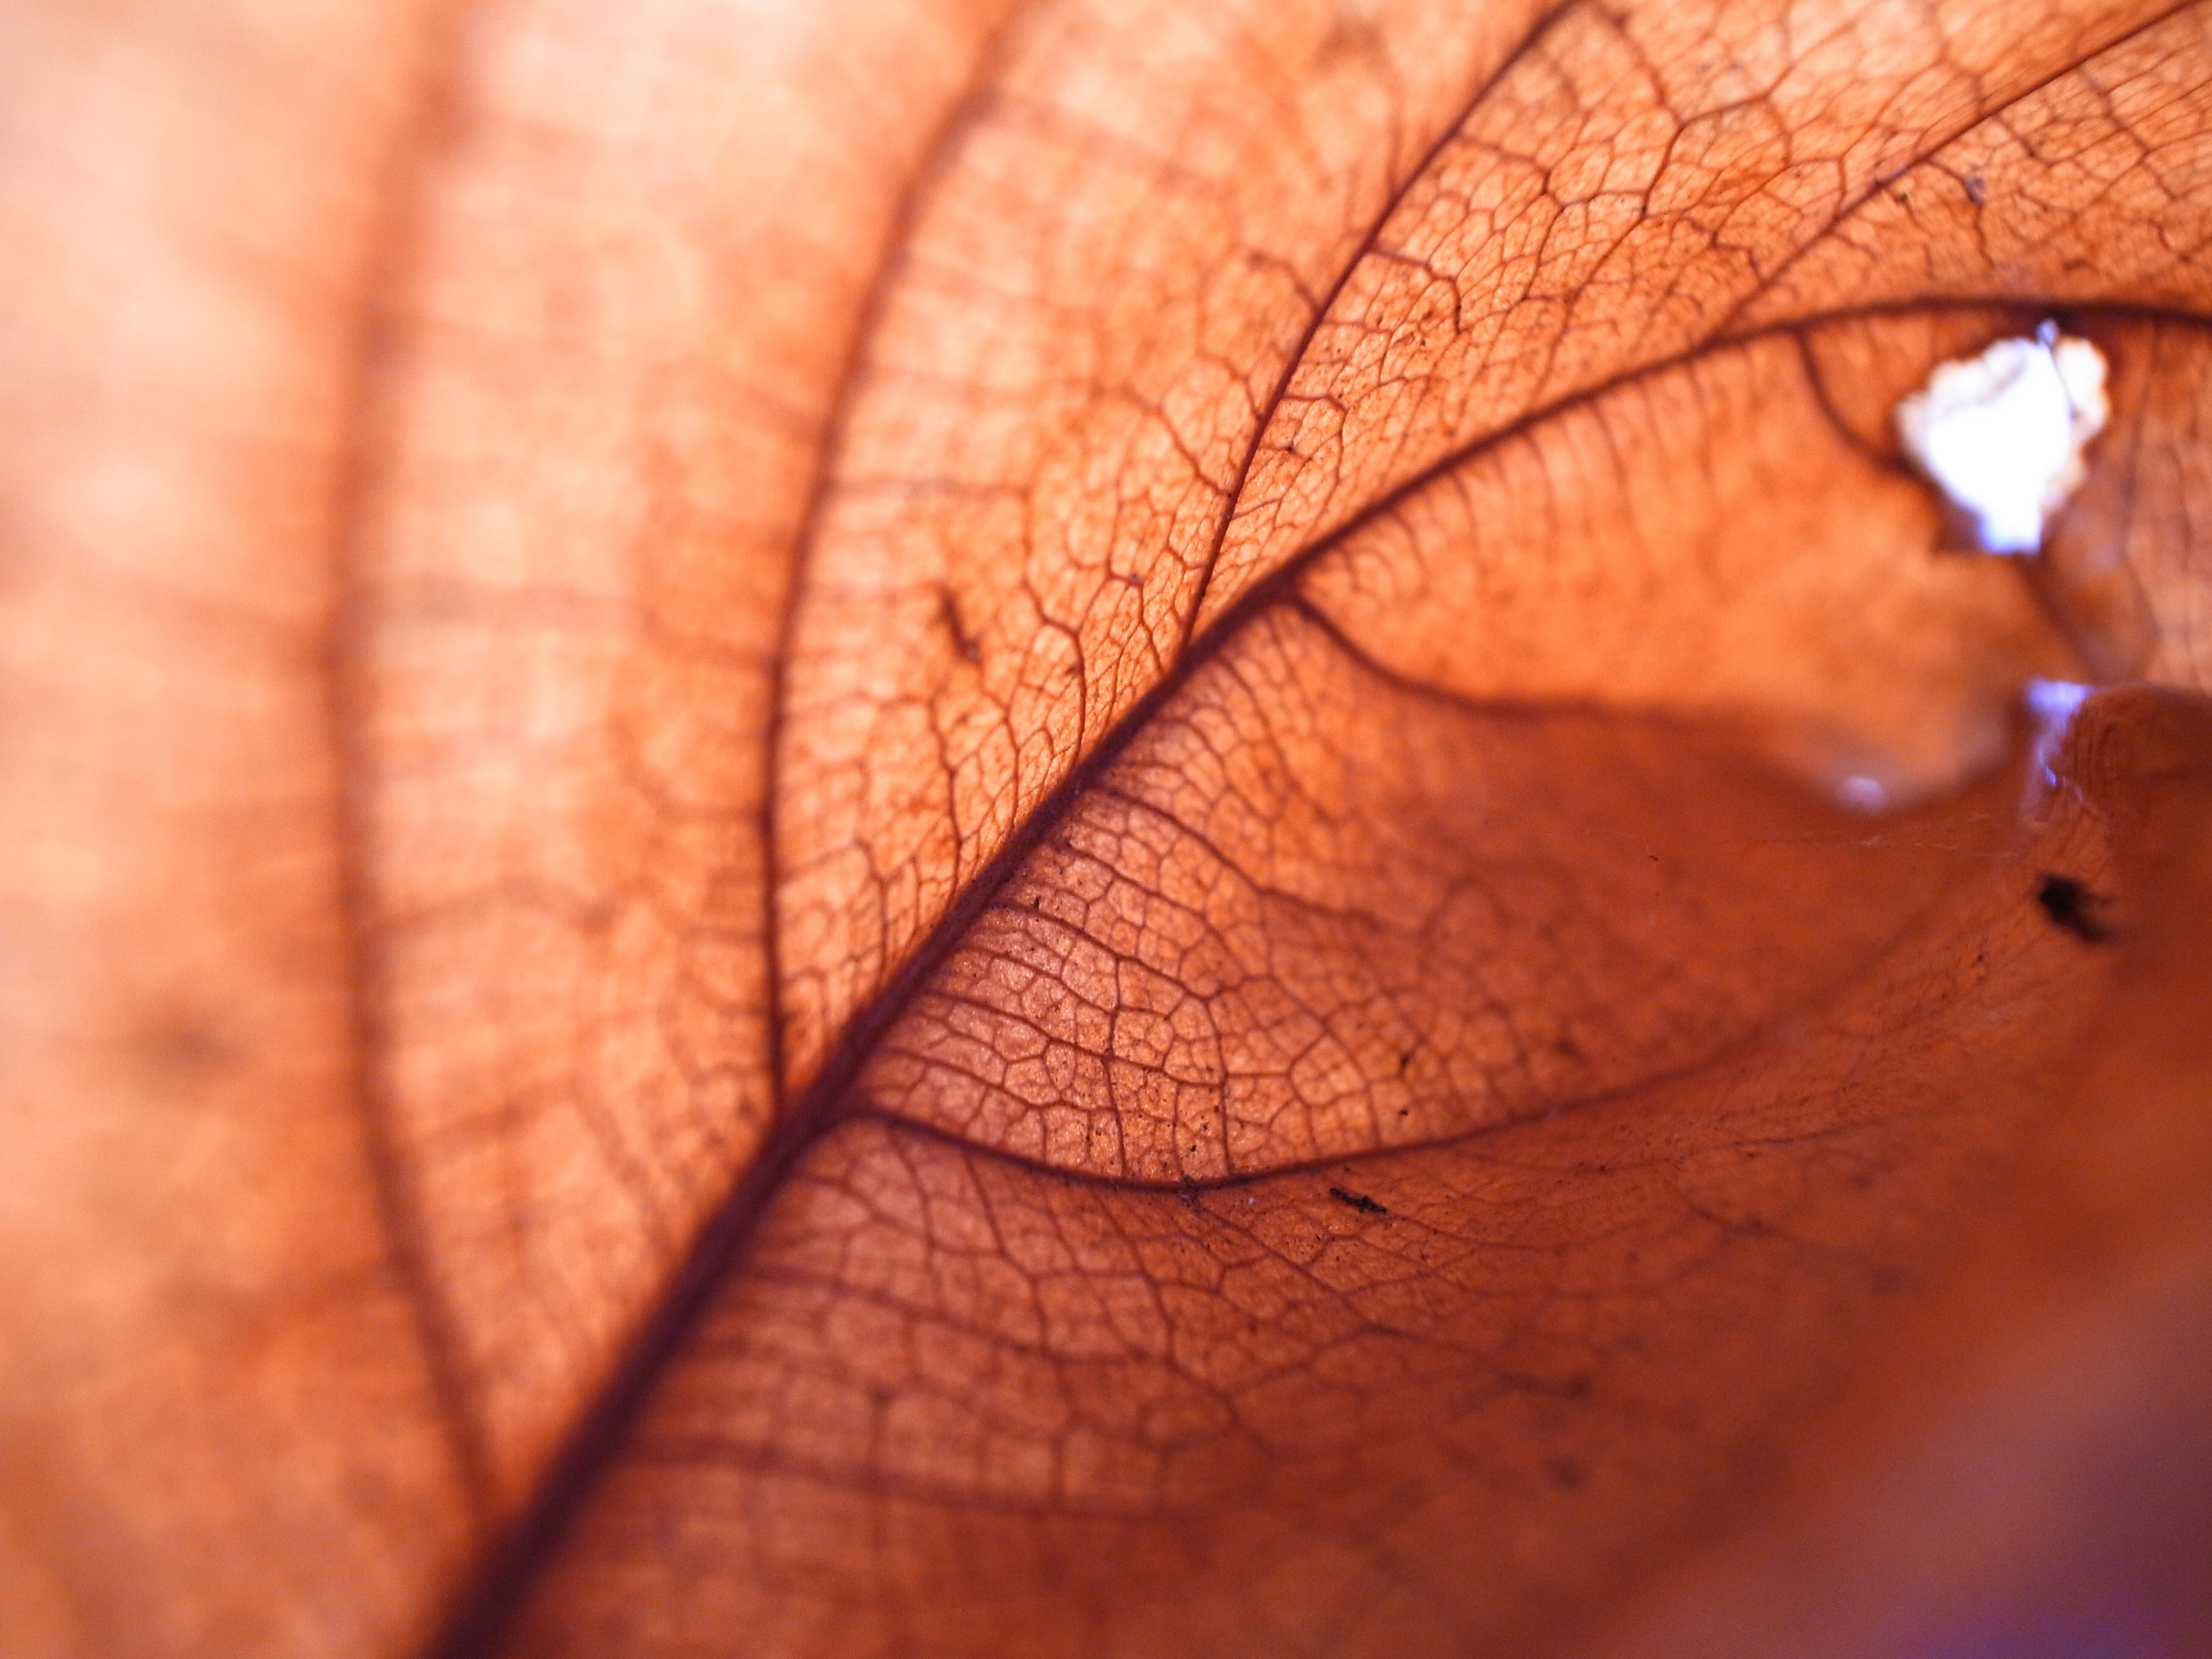 Structure, Autumn, Leaf, Natural, Tree, close-up, human body part